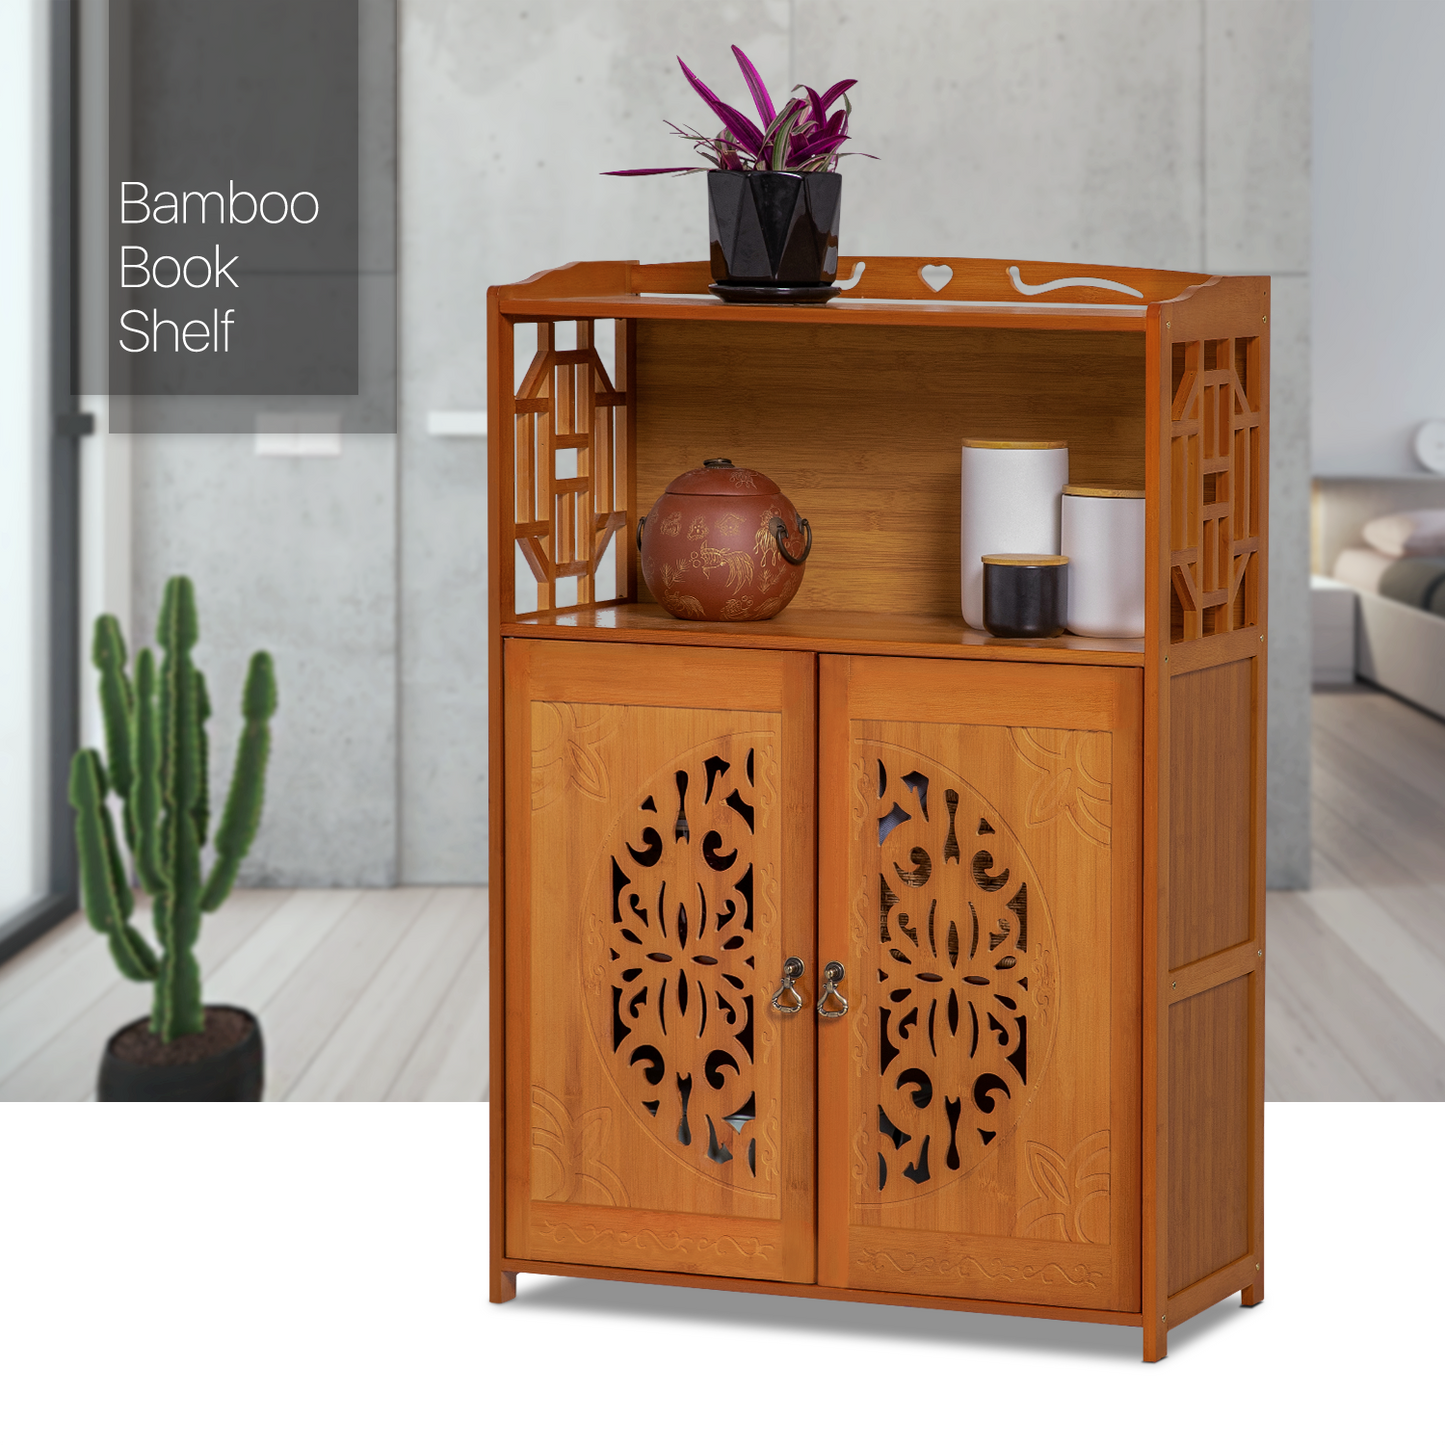 Chinese Hollow Pattern Two-Doors Bookcase - Brown